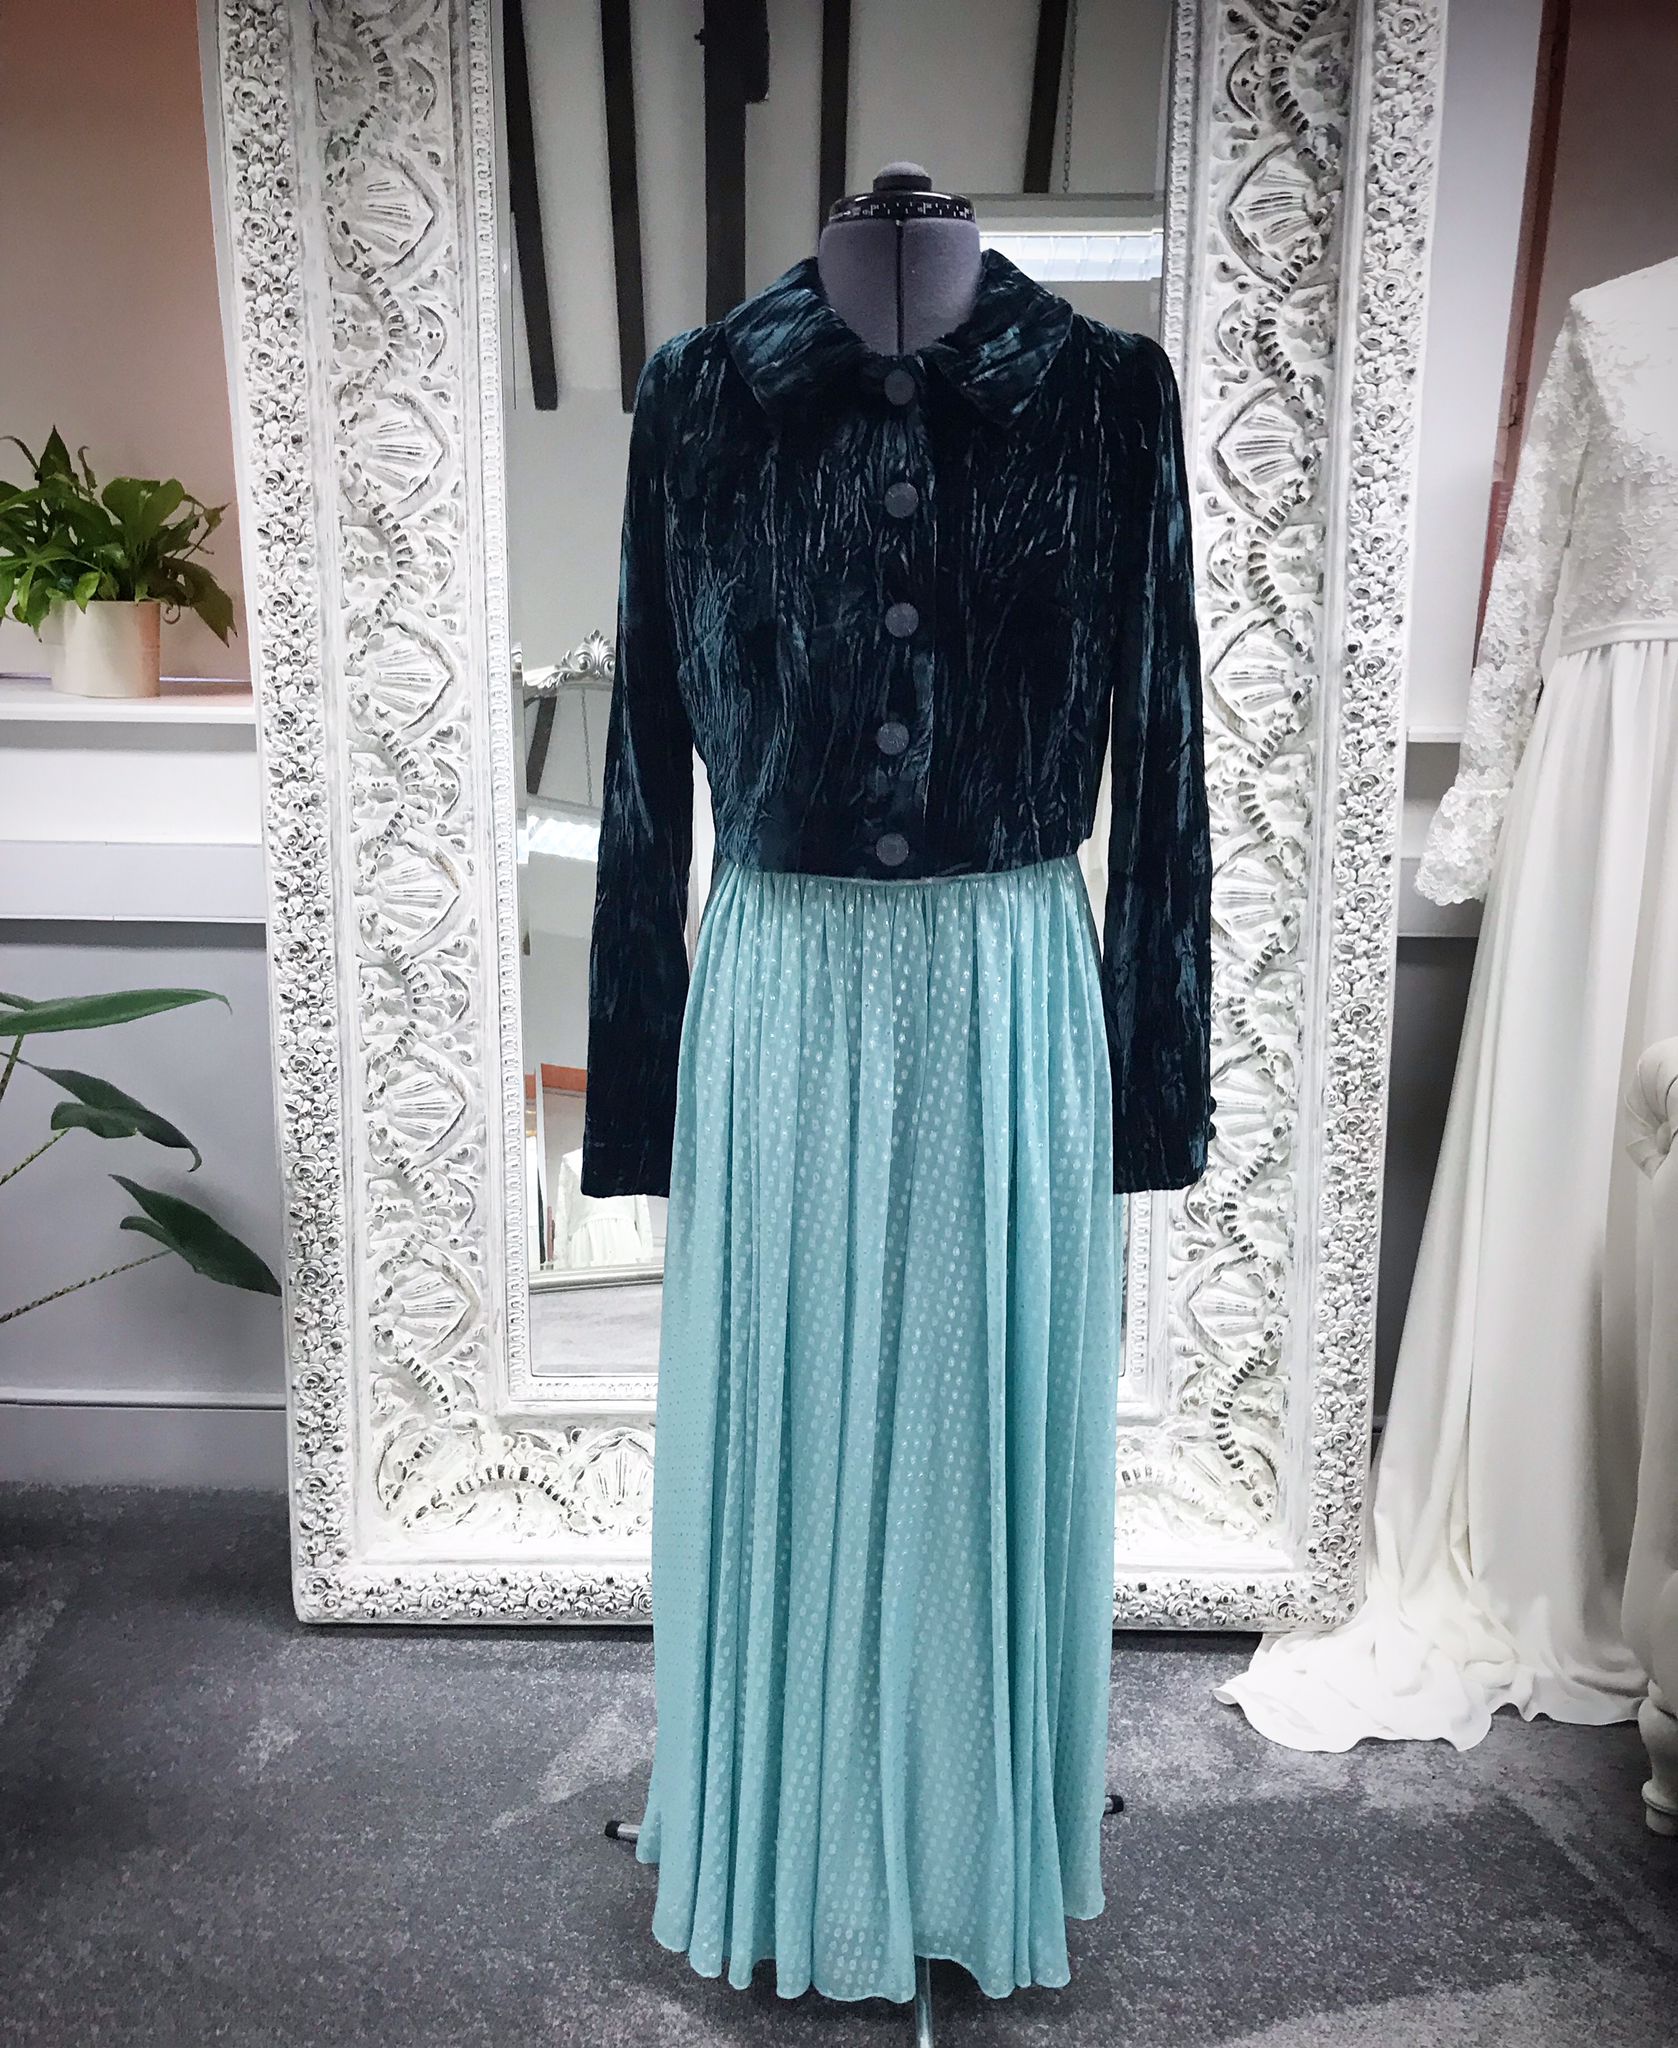 A Sister making a special effort with this crushed velvet cropped jacket and dress in an eye catching aqua chiffon with metallics woven in.